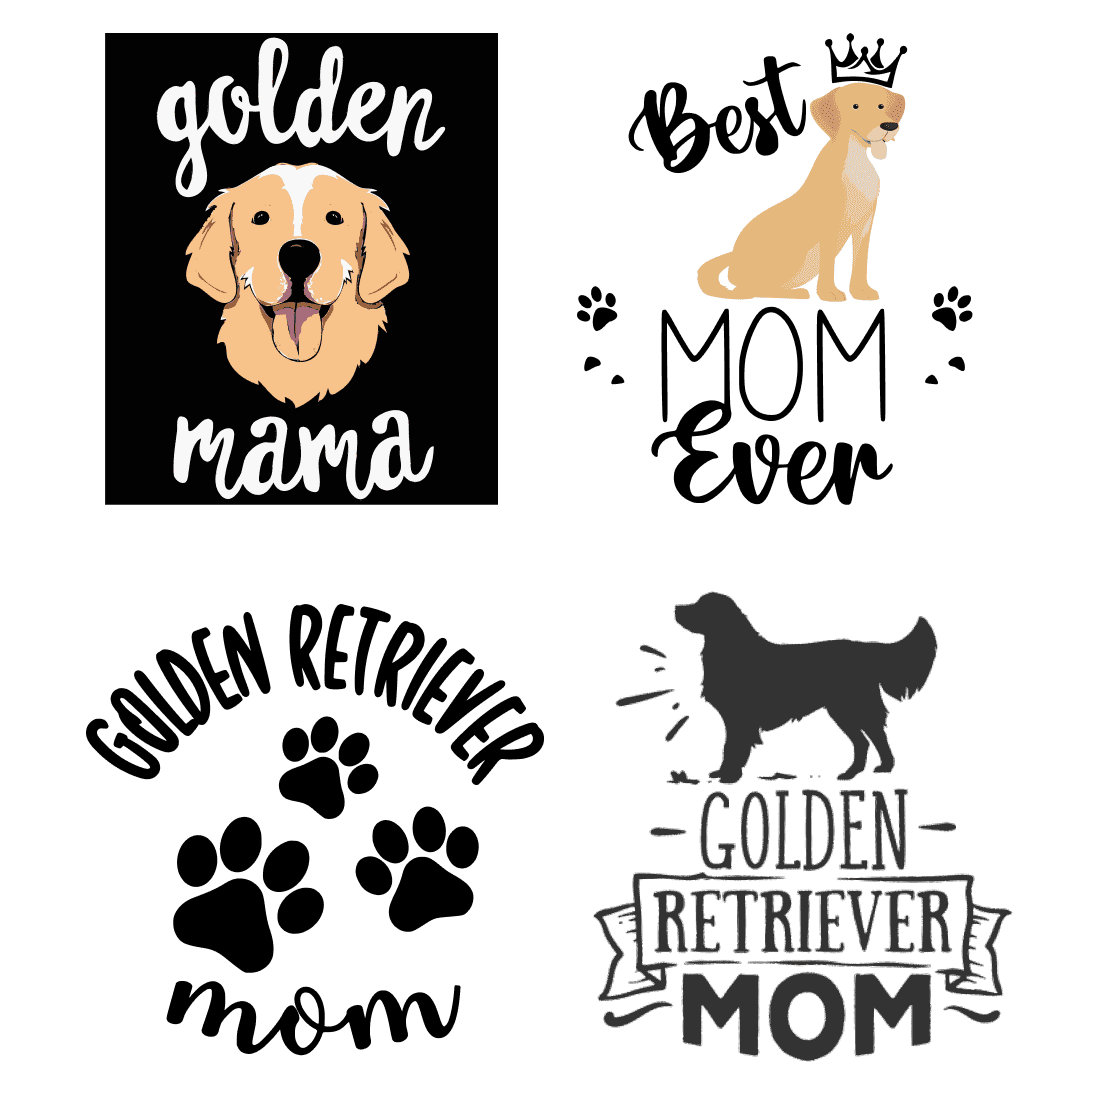 Image of mother golden retriever on white and black backgrounds.